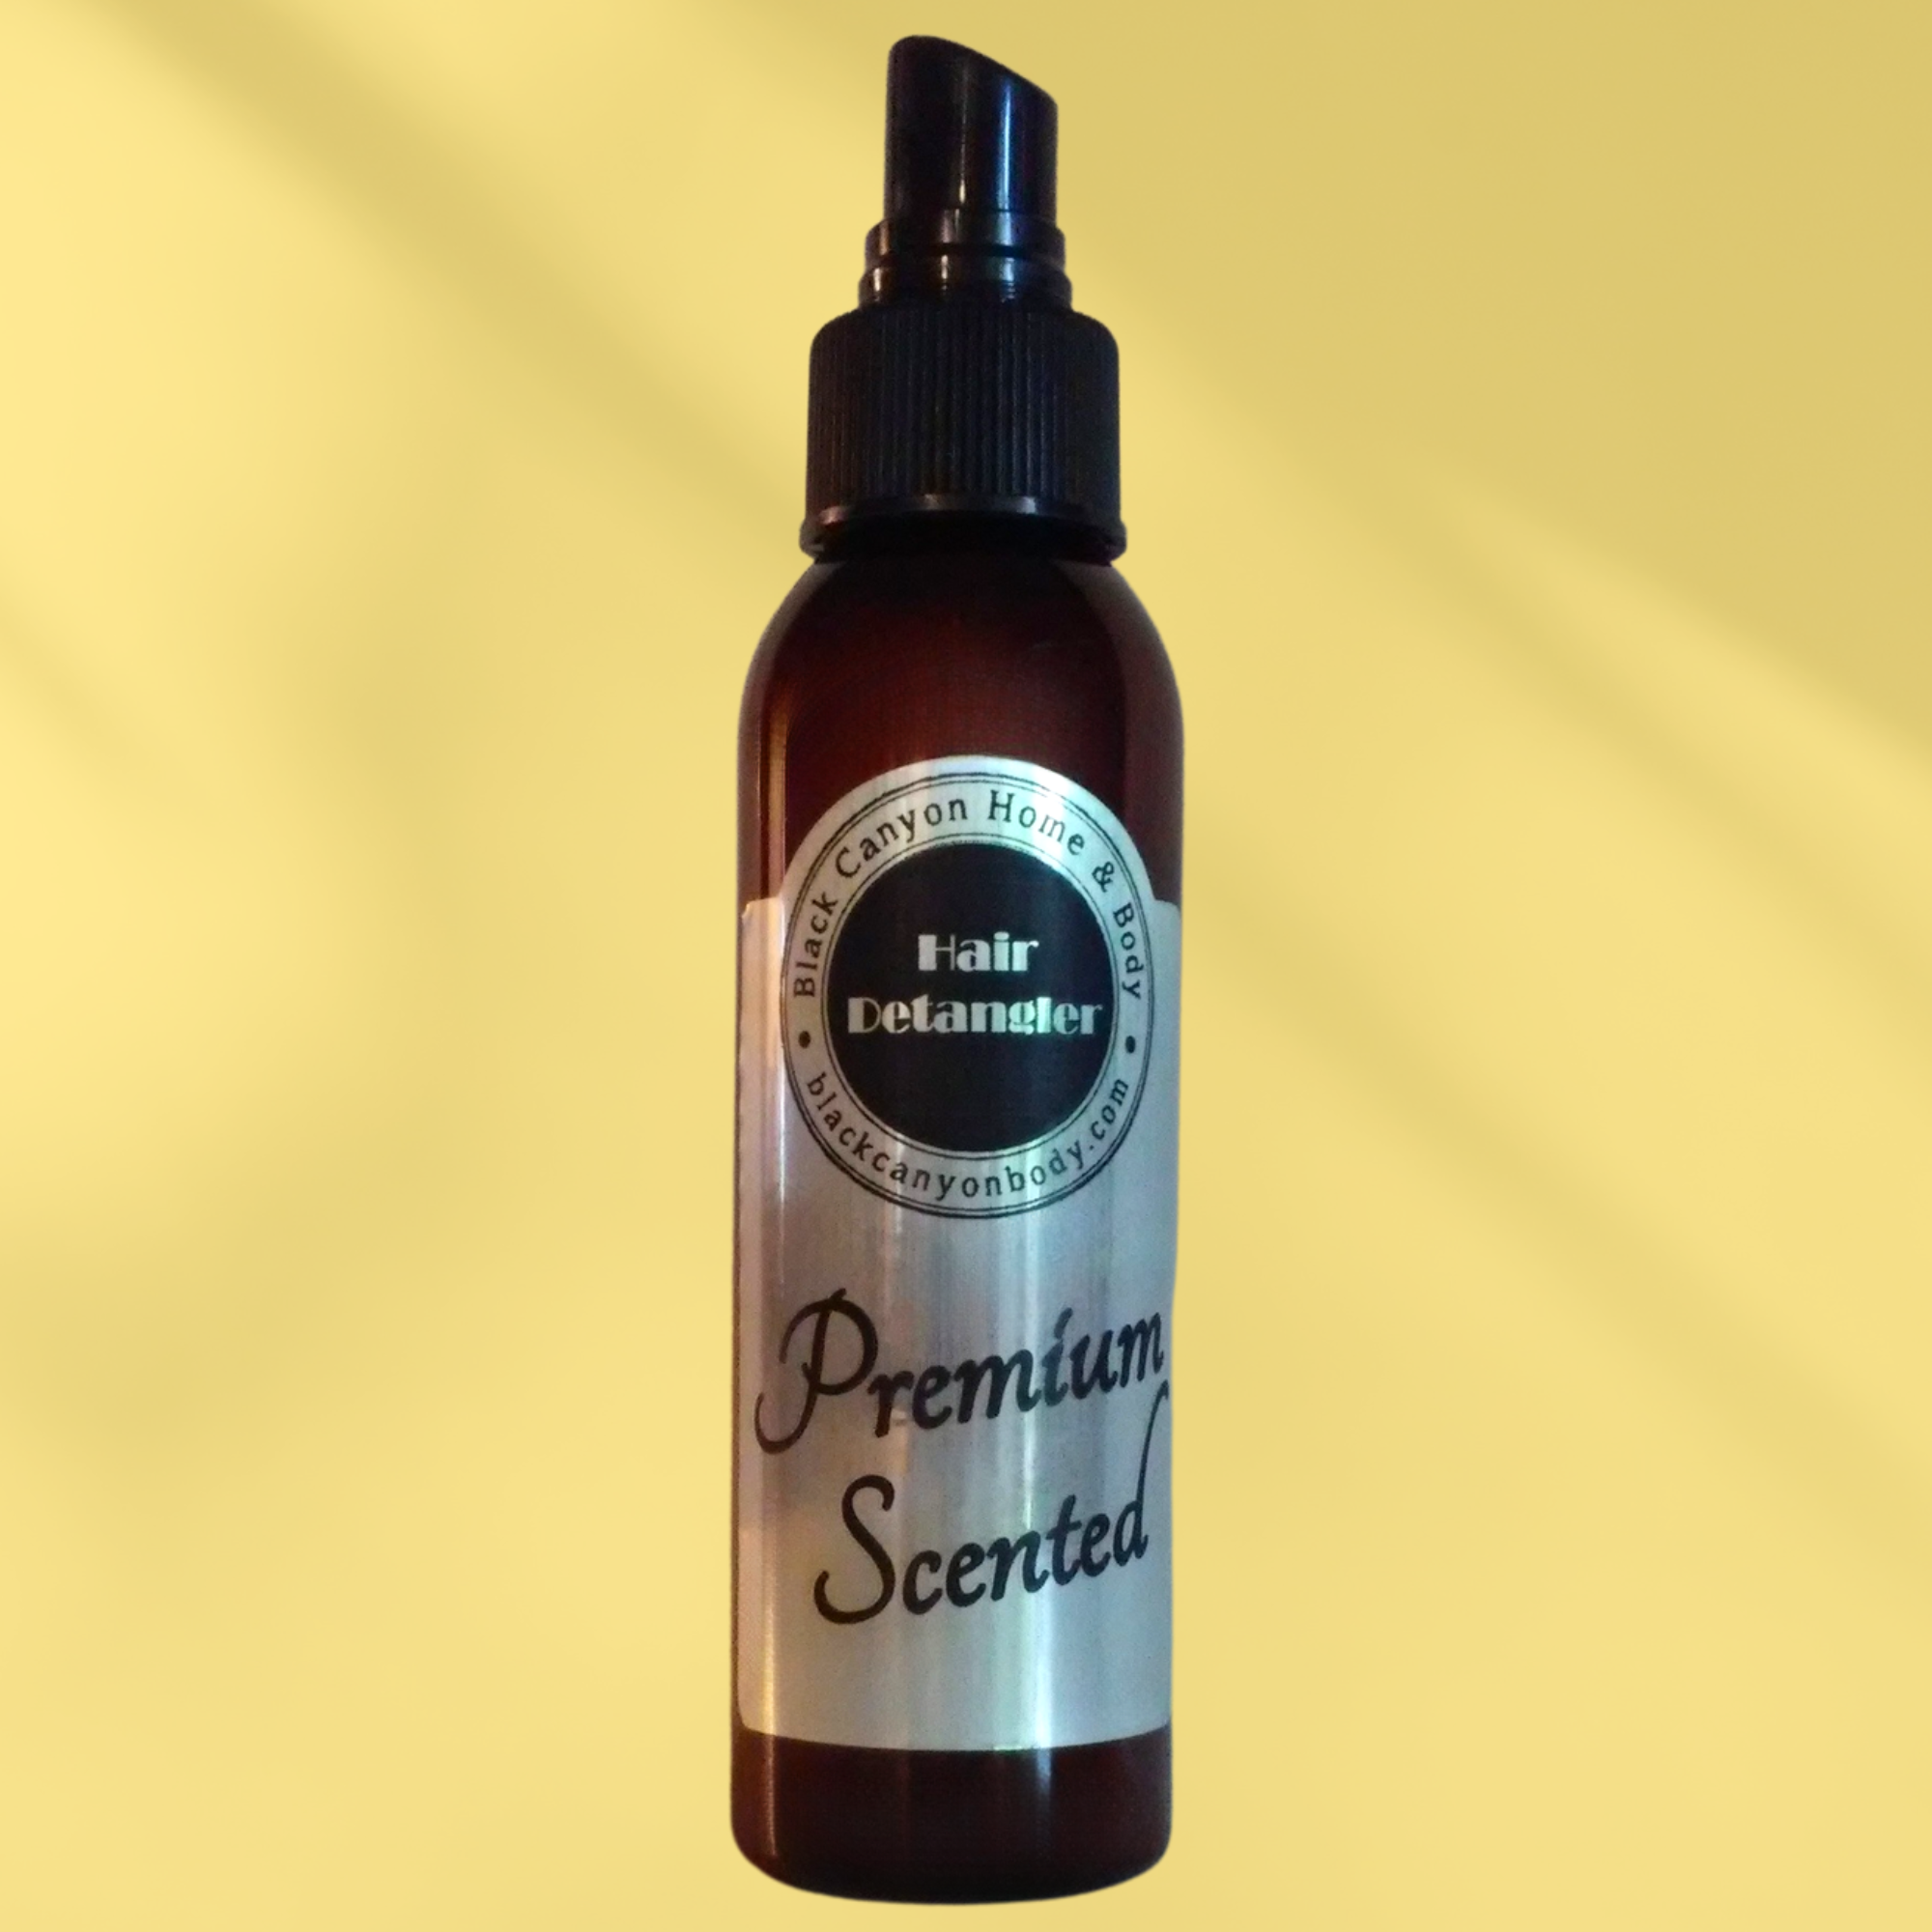 Black Canyon Currant & Bamboo Scented Hair Detangler Spray with Olive Oil